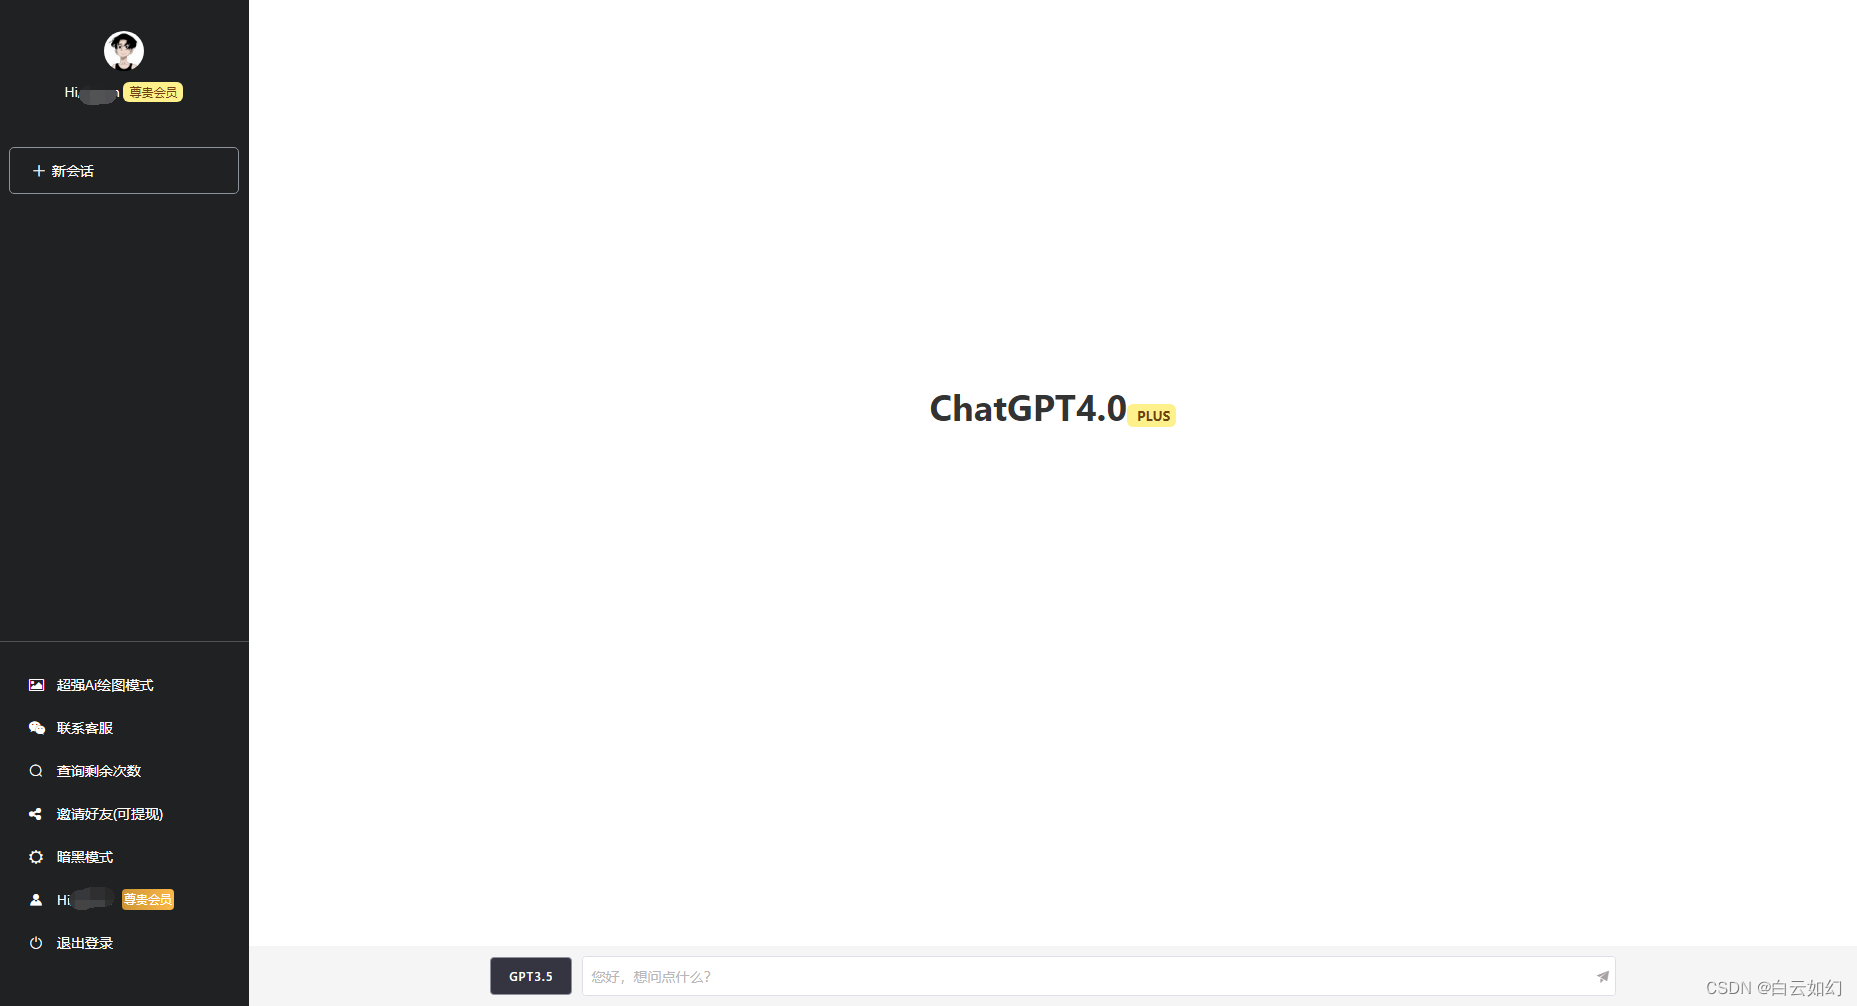 ChatGPT website source code operation version + support GPT4 + support ai painting (Midjourney) + background management